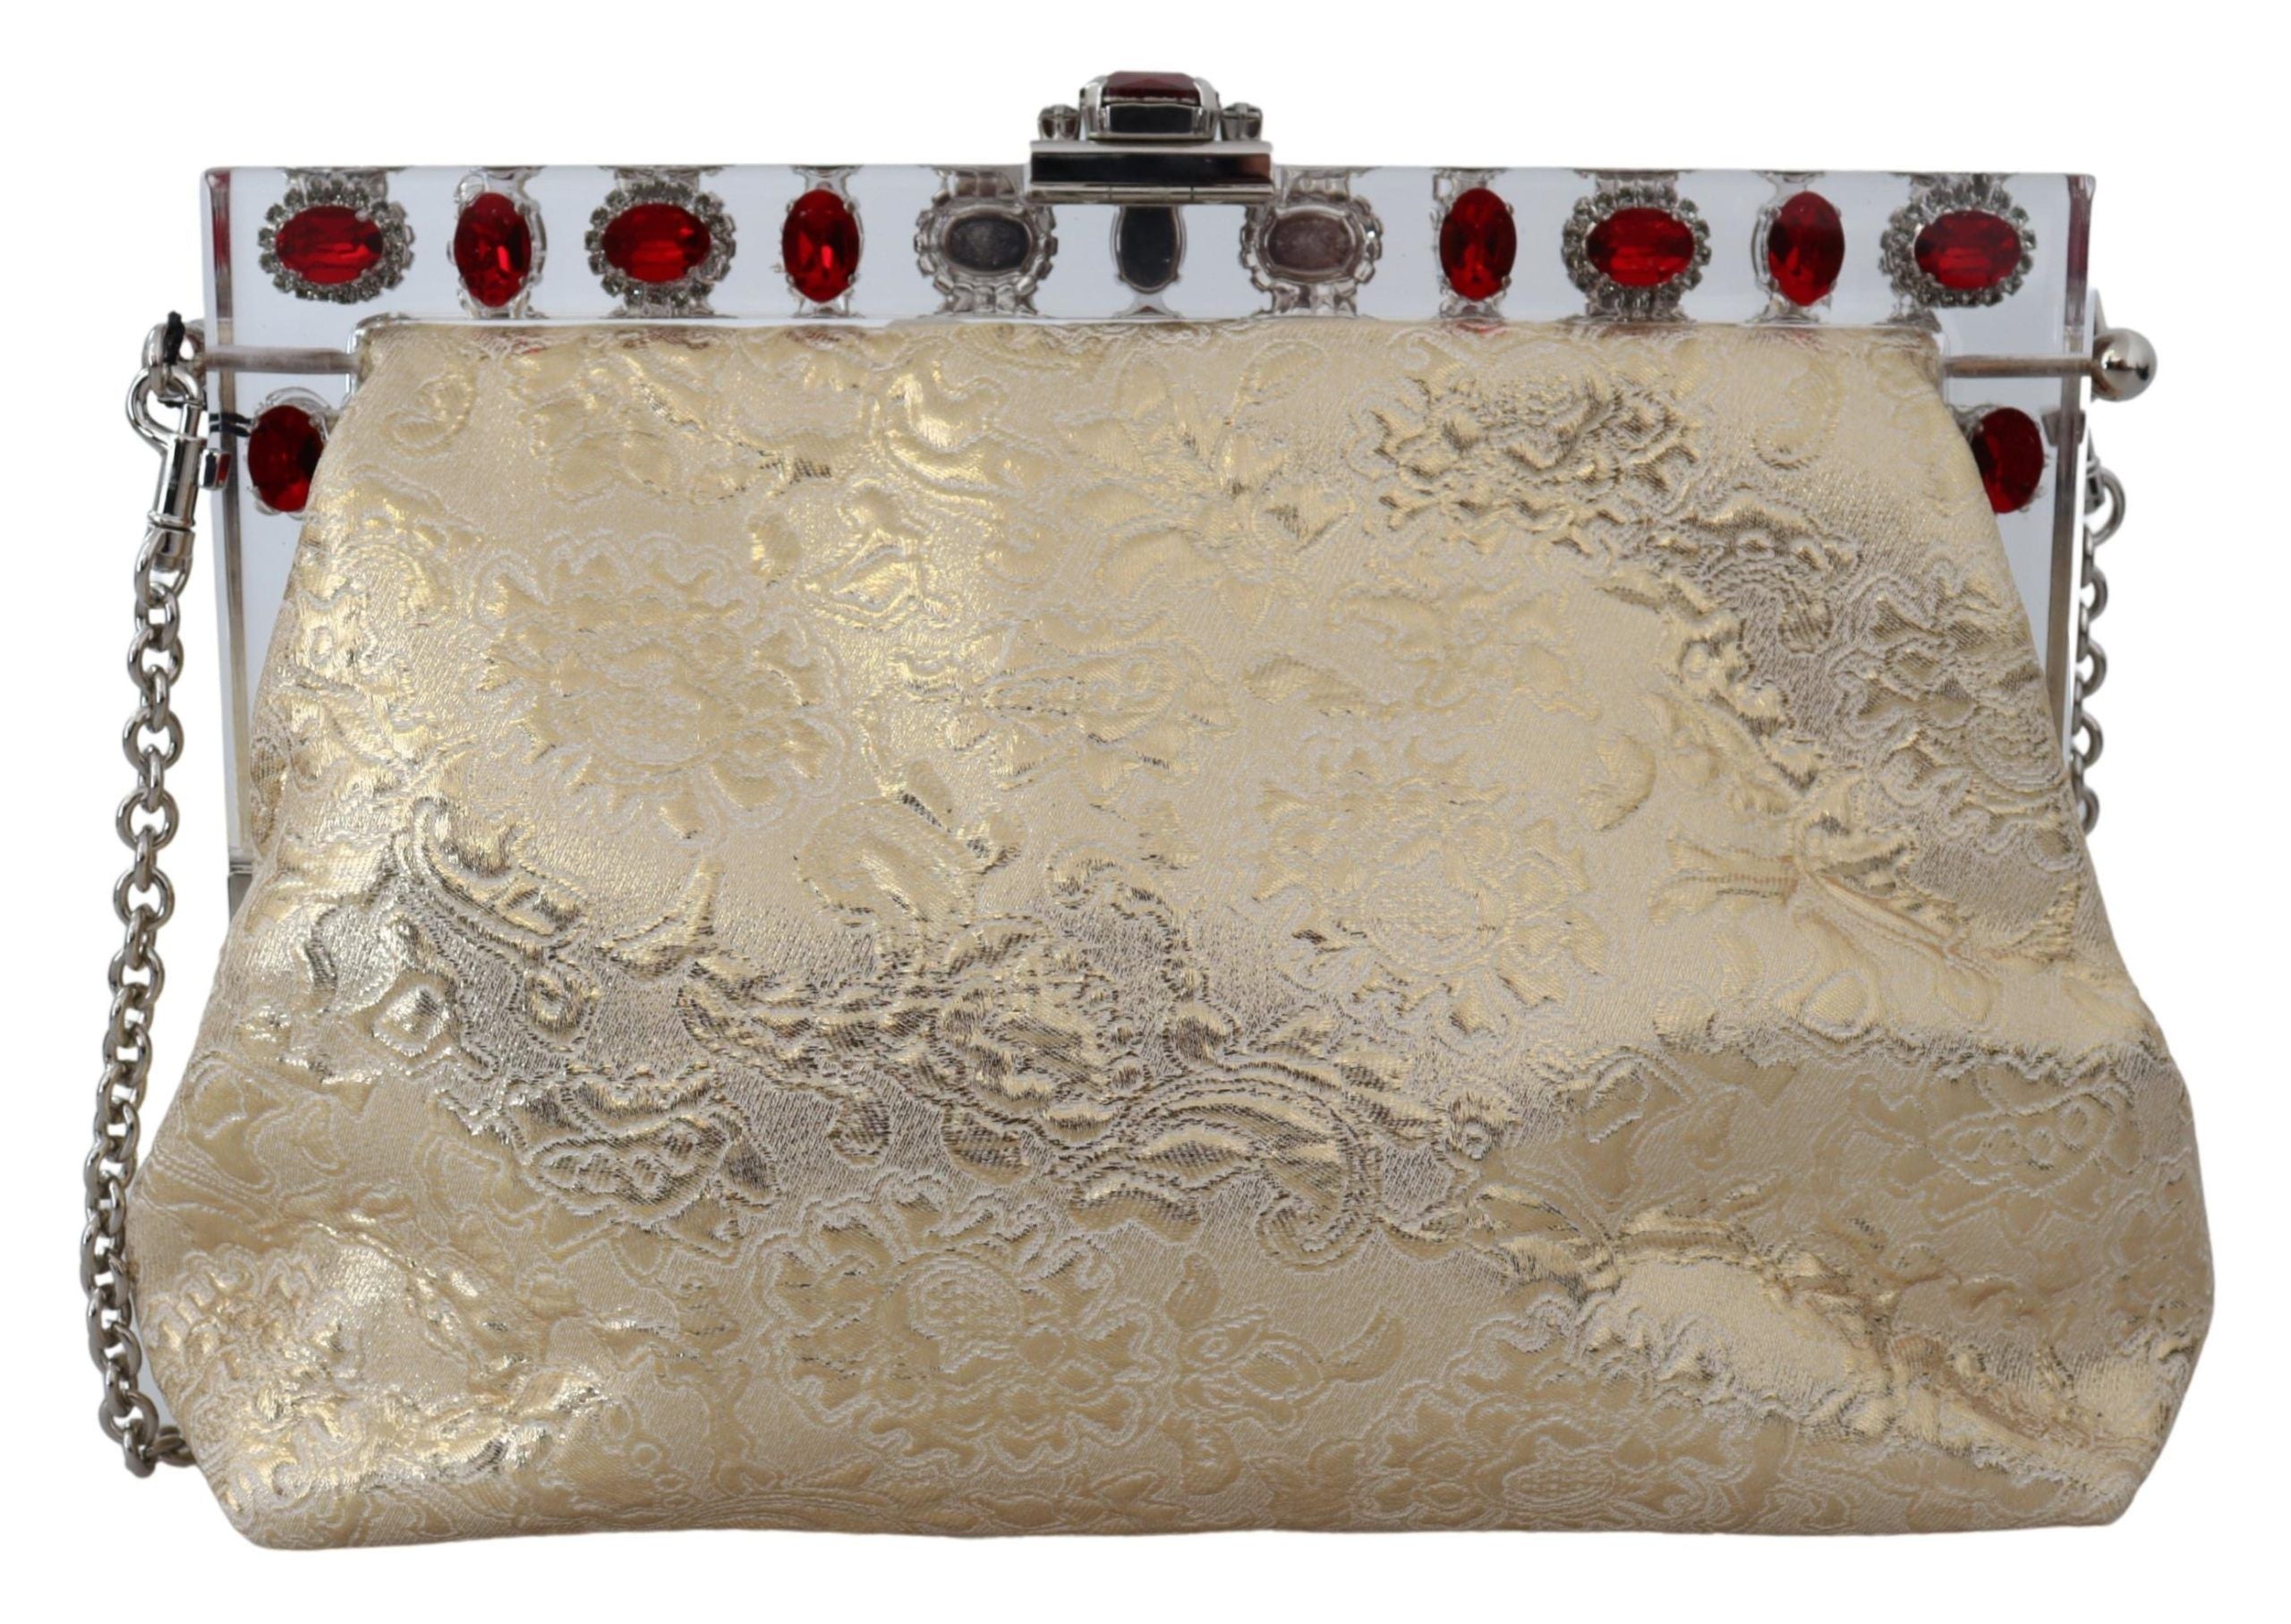 Dolce & Gabbana Glamorous Gold Evening Clutch with Crystal Details